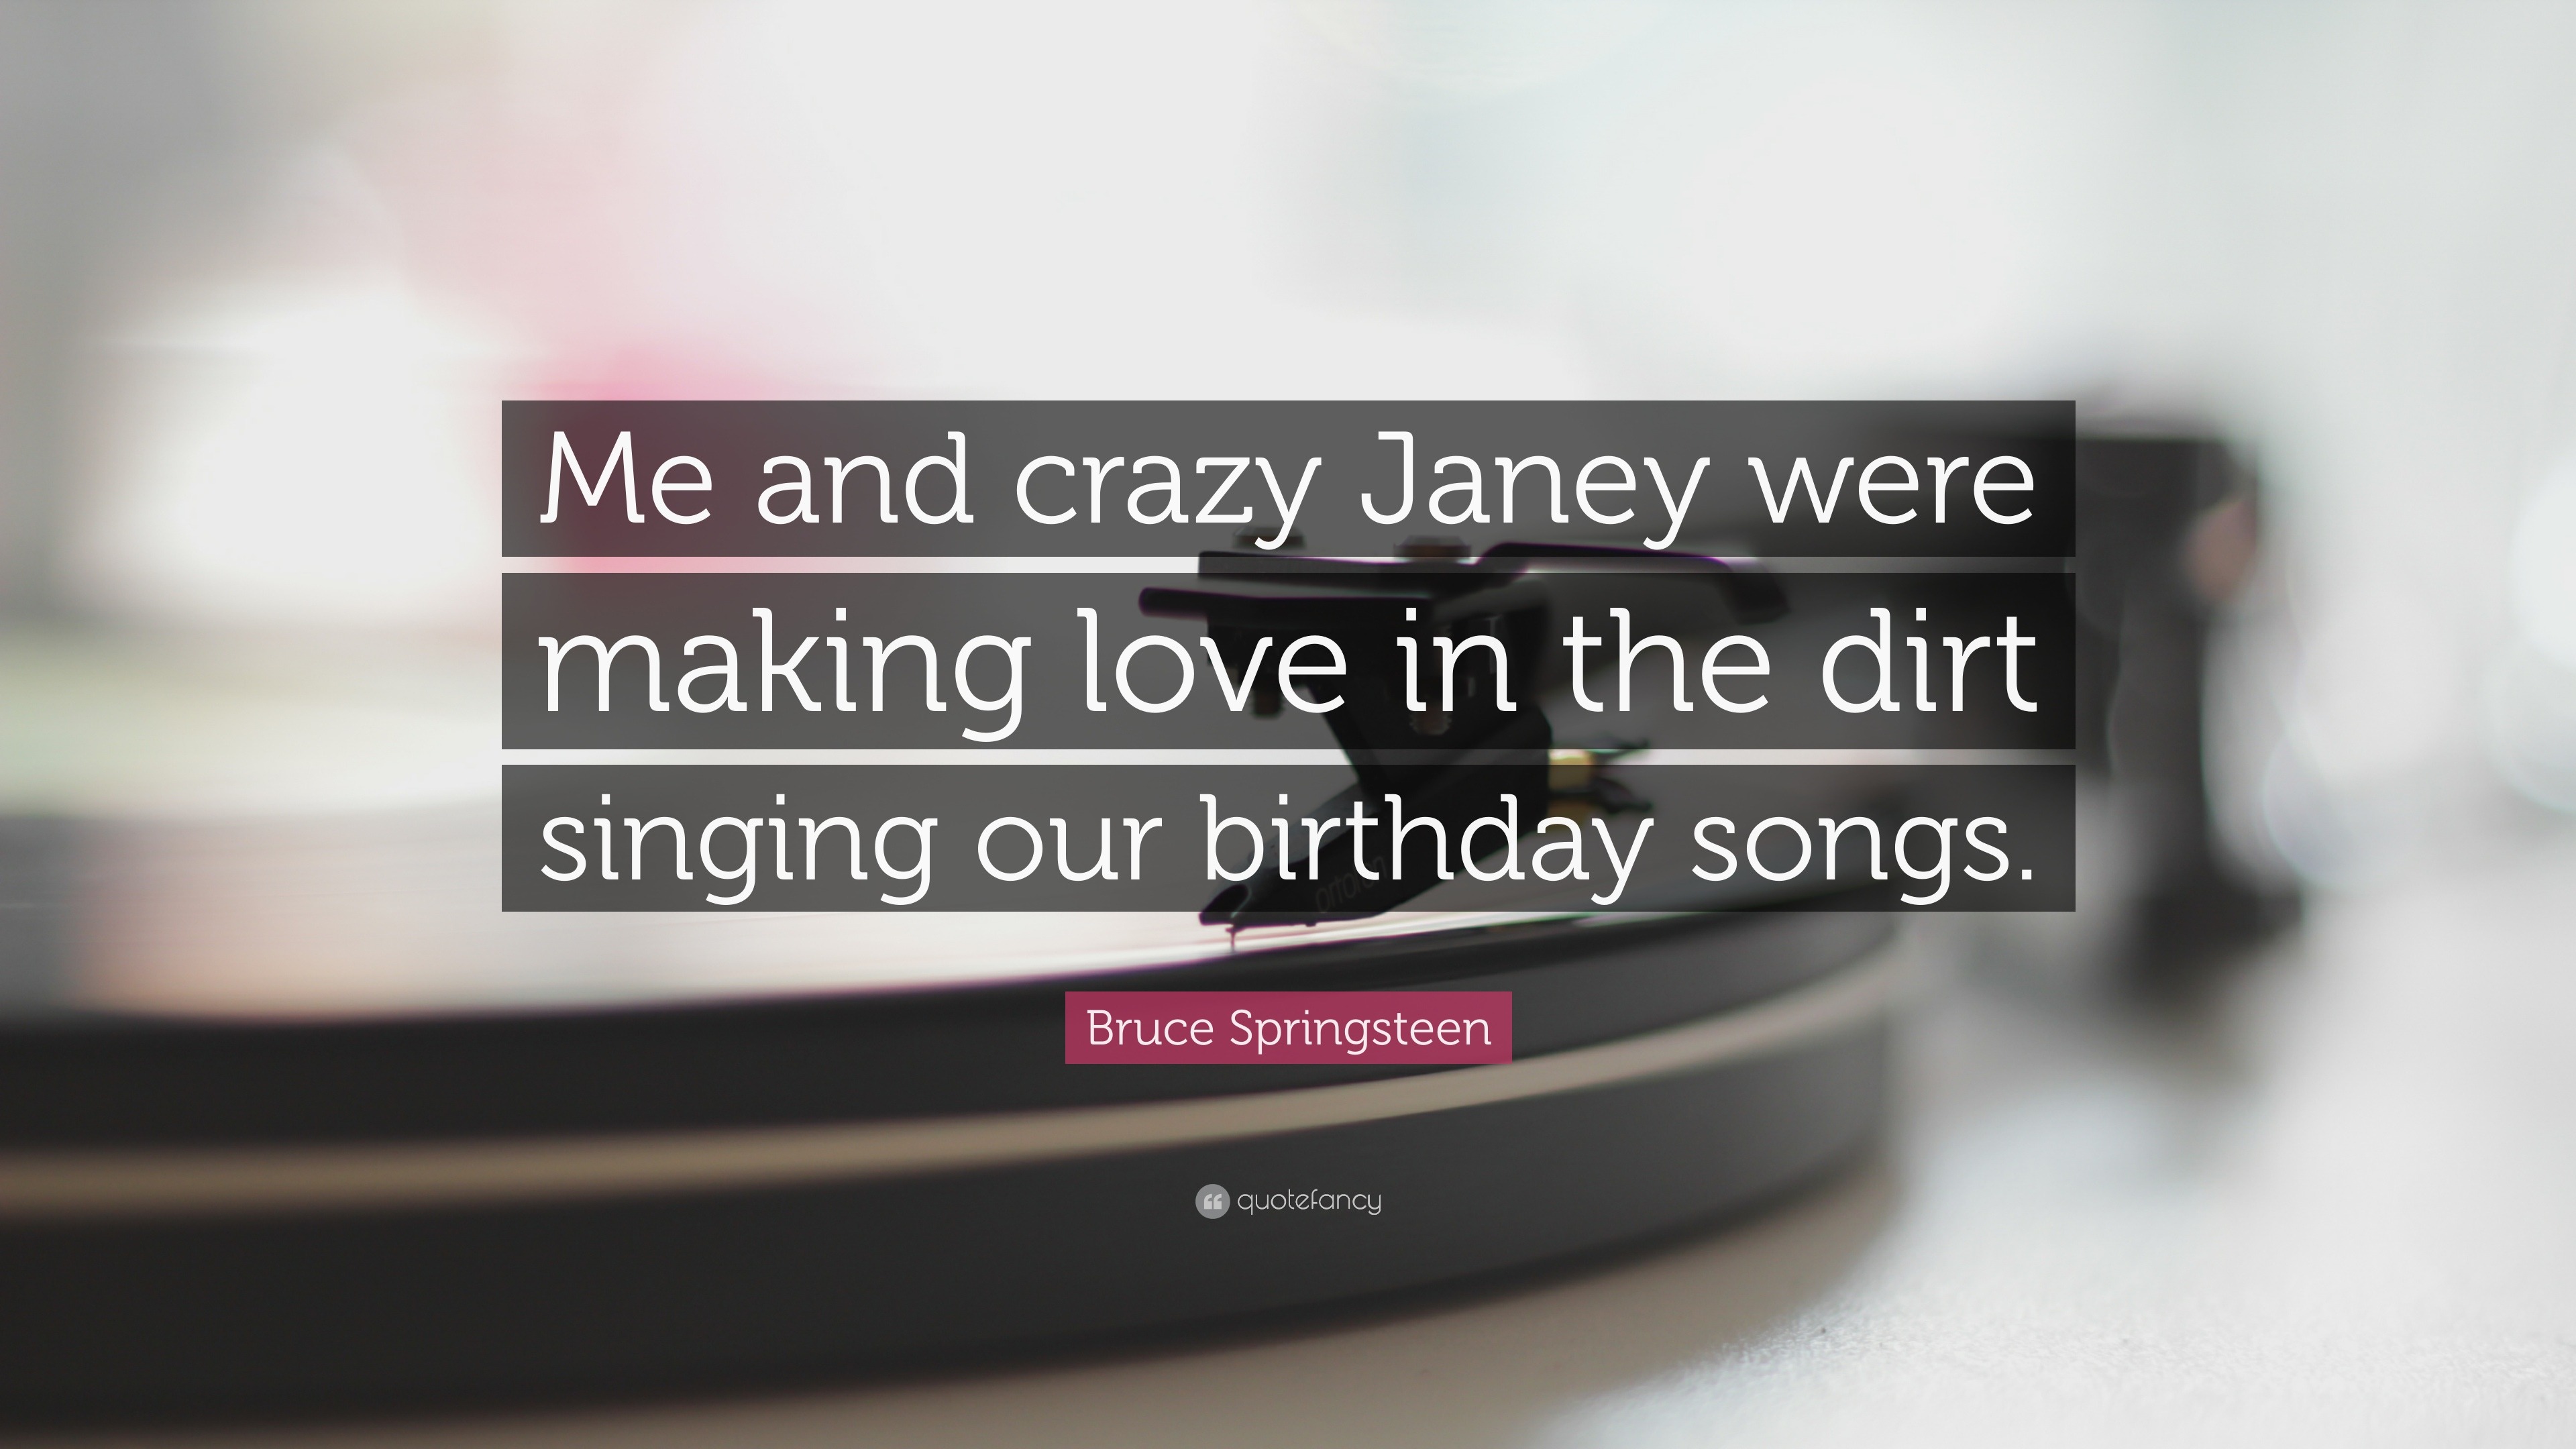 Bruce Springsteen Quote “Me and crazy Janey were making love in the dirt singing